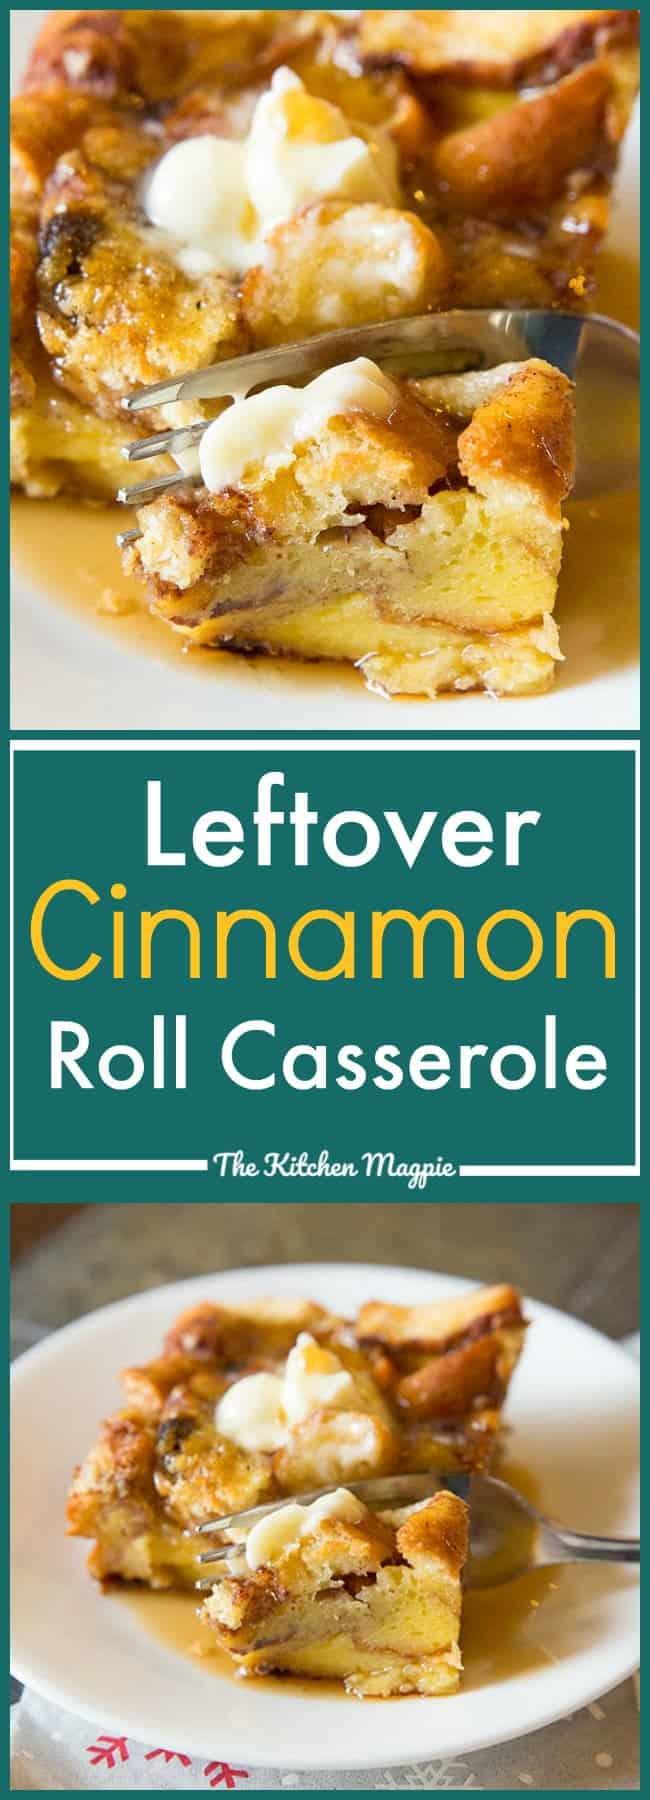 Leftover Cinnamon Rolls French Toast Casserole - Easy, fast and simple, all you need is prebaked cinnamon rolls and you are in business!